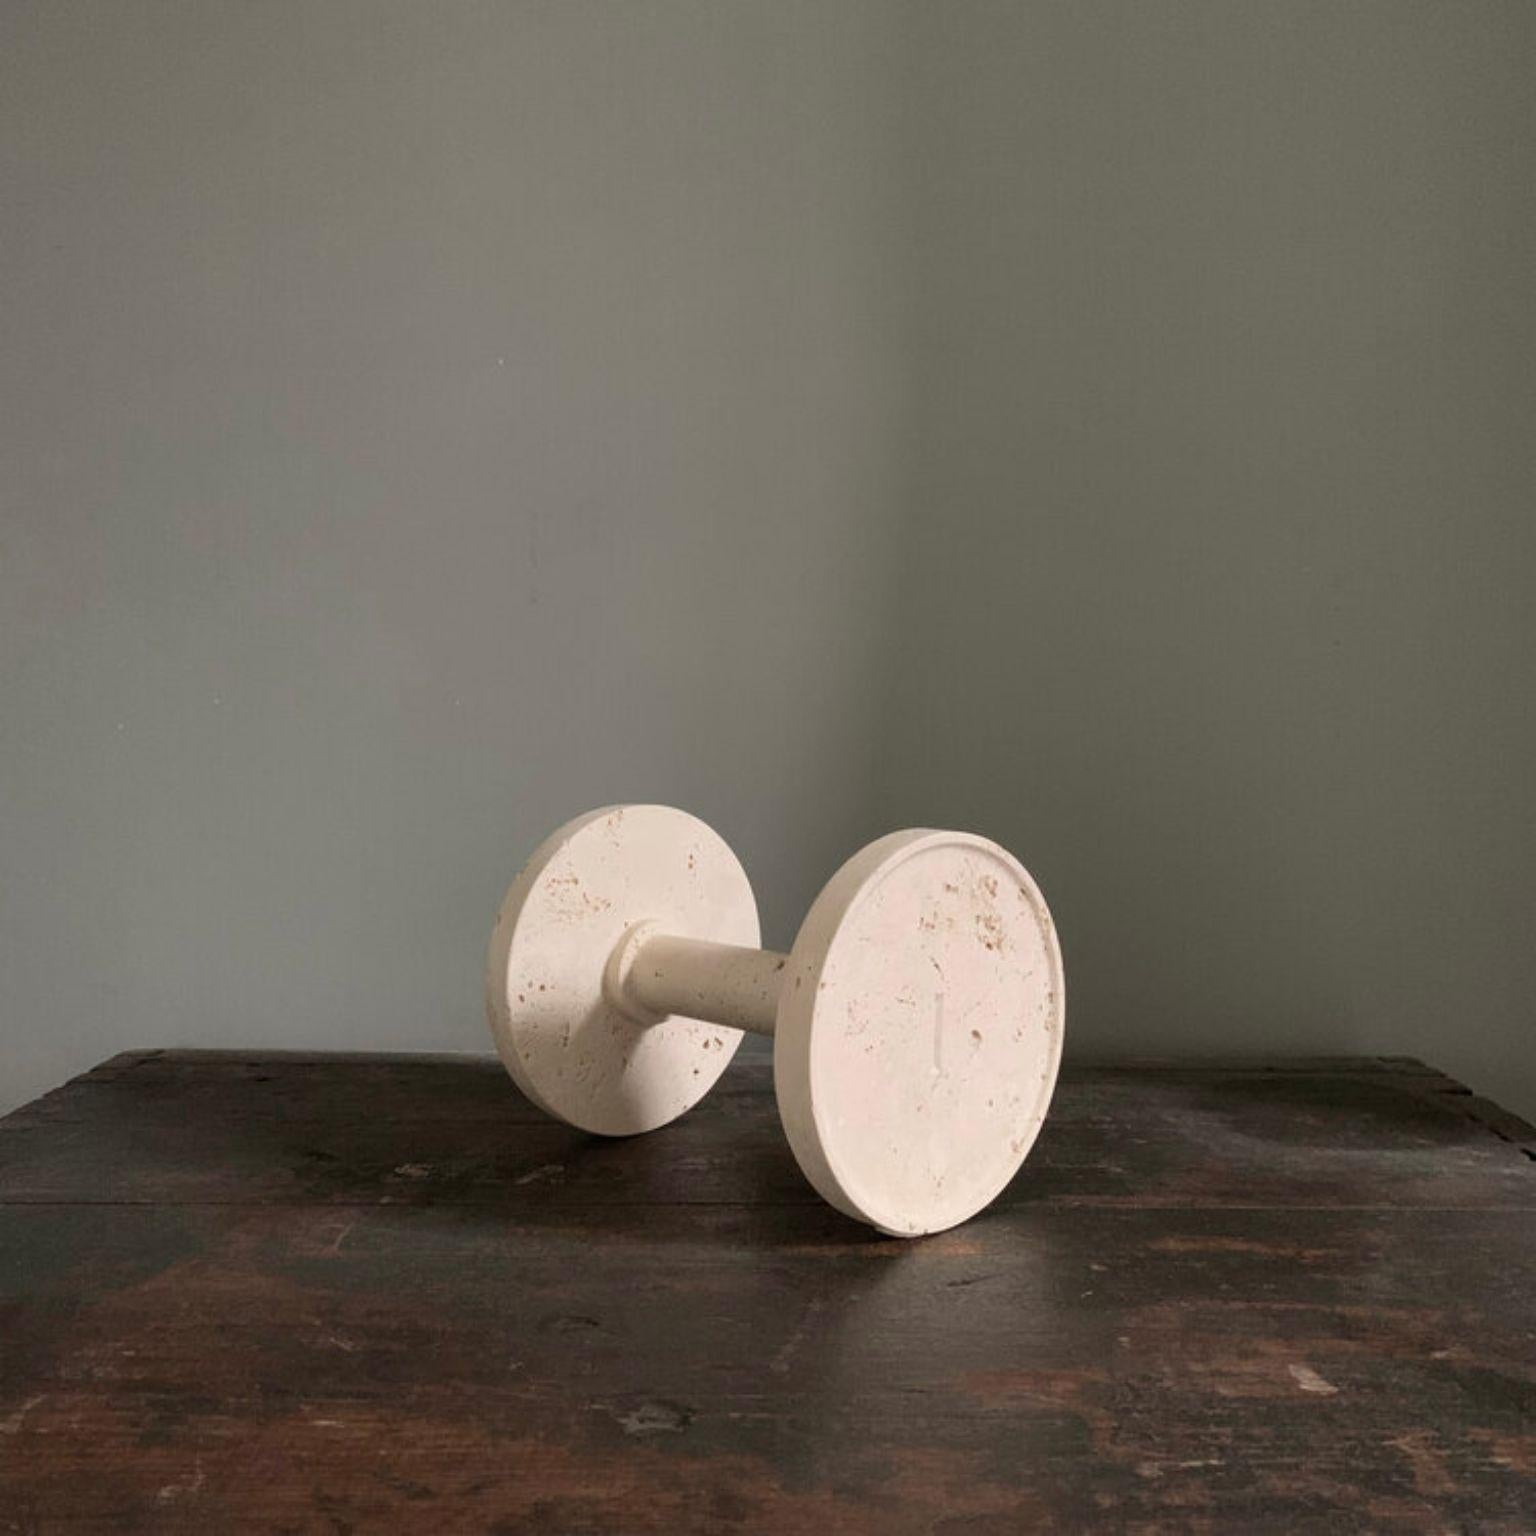 1 Kg dumbbell by Pete Pongsak
2017
Materials: Italian Travertine
Dimensions: diameter 12.5 x height 16.5 cm
Made in Italy

Hand craved from a single piece of stone.

ARCHIVE & ARCHIVE Studio specializes in creating functional sculptures and